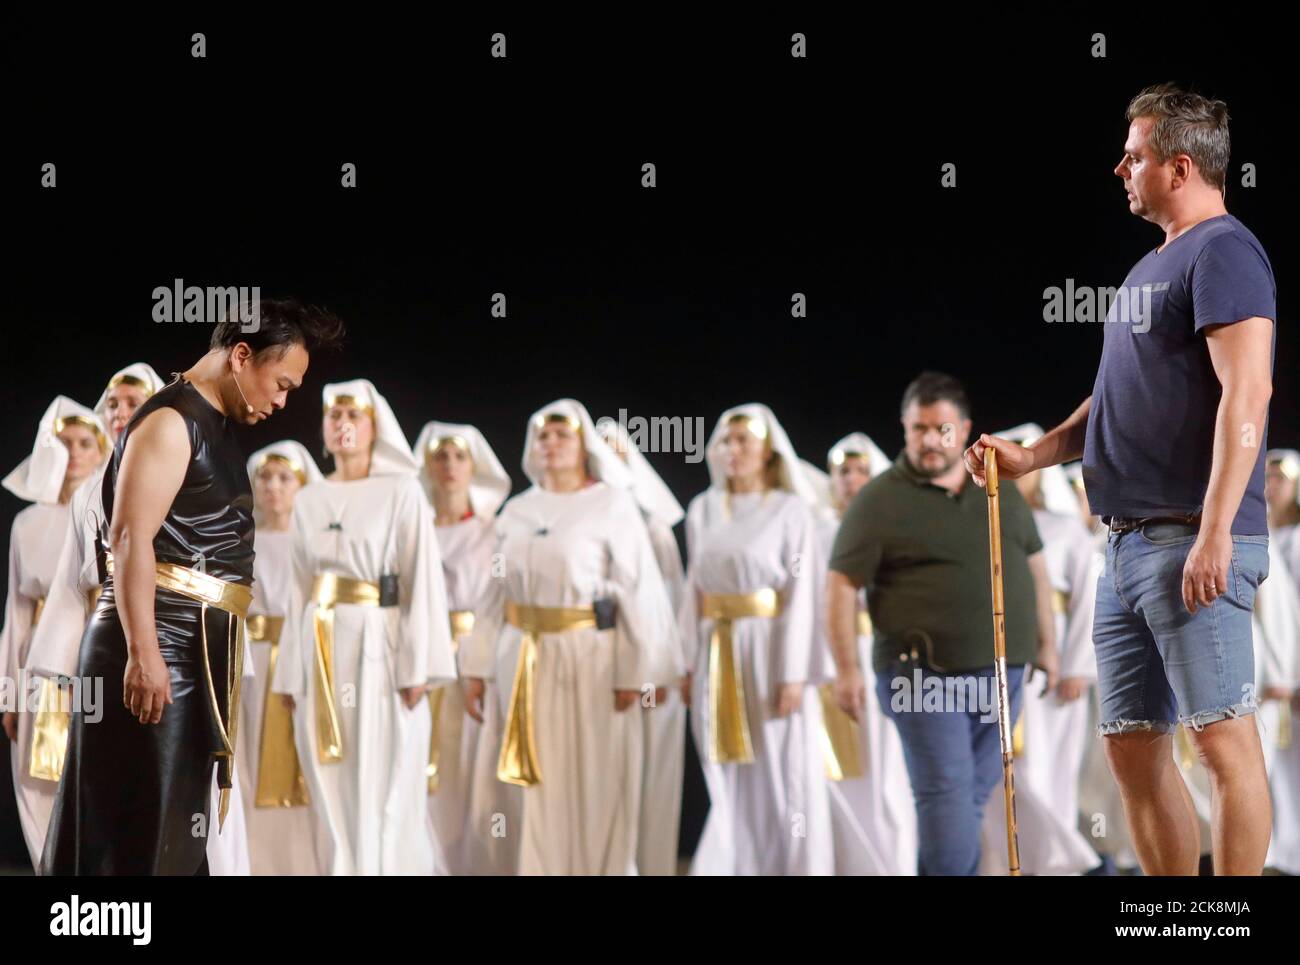 Mickael Spadaccini (R) playing the role of Radames rehearses a scene from the opera 'Aida' originally set in the Old Kingdom of Egypt and composed by Giuseppe Verdi at the Temple of Queen Hatshepsut in West Bank of Luxor, Egypt, October 24, 2019. REUTERS/Amr Abdallah Dalsh Stock Photo